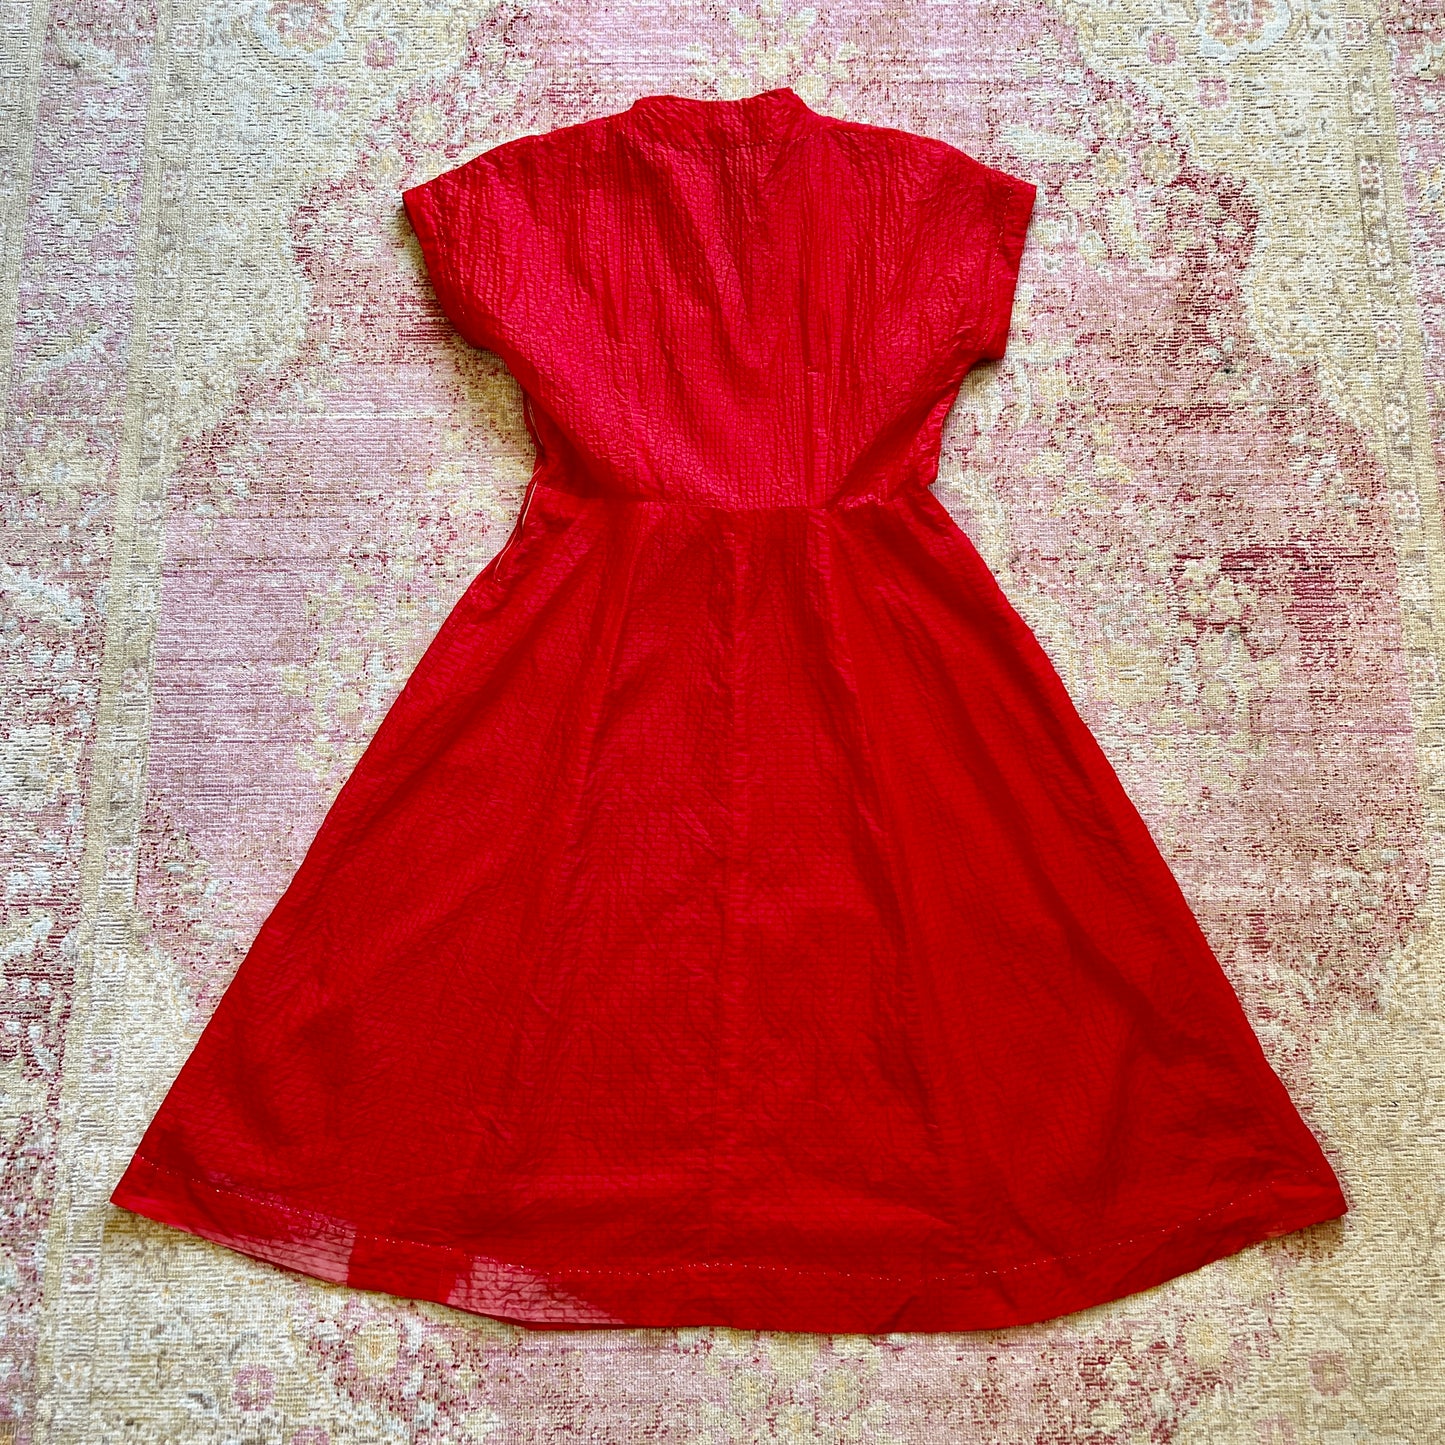 [AS-IS] 1940s Red Shirtwaist Dress | large